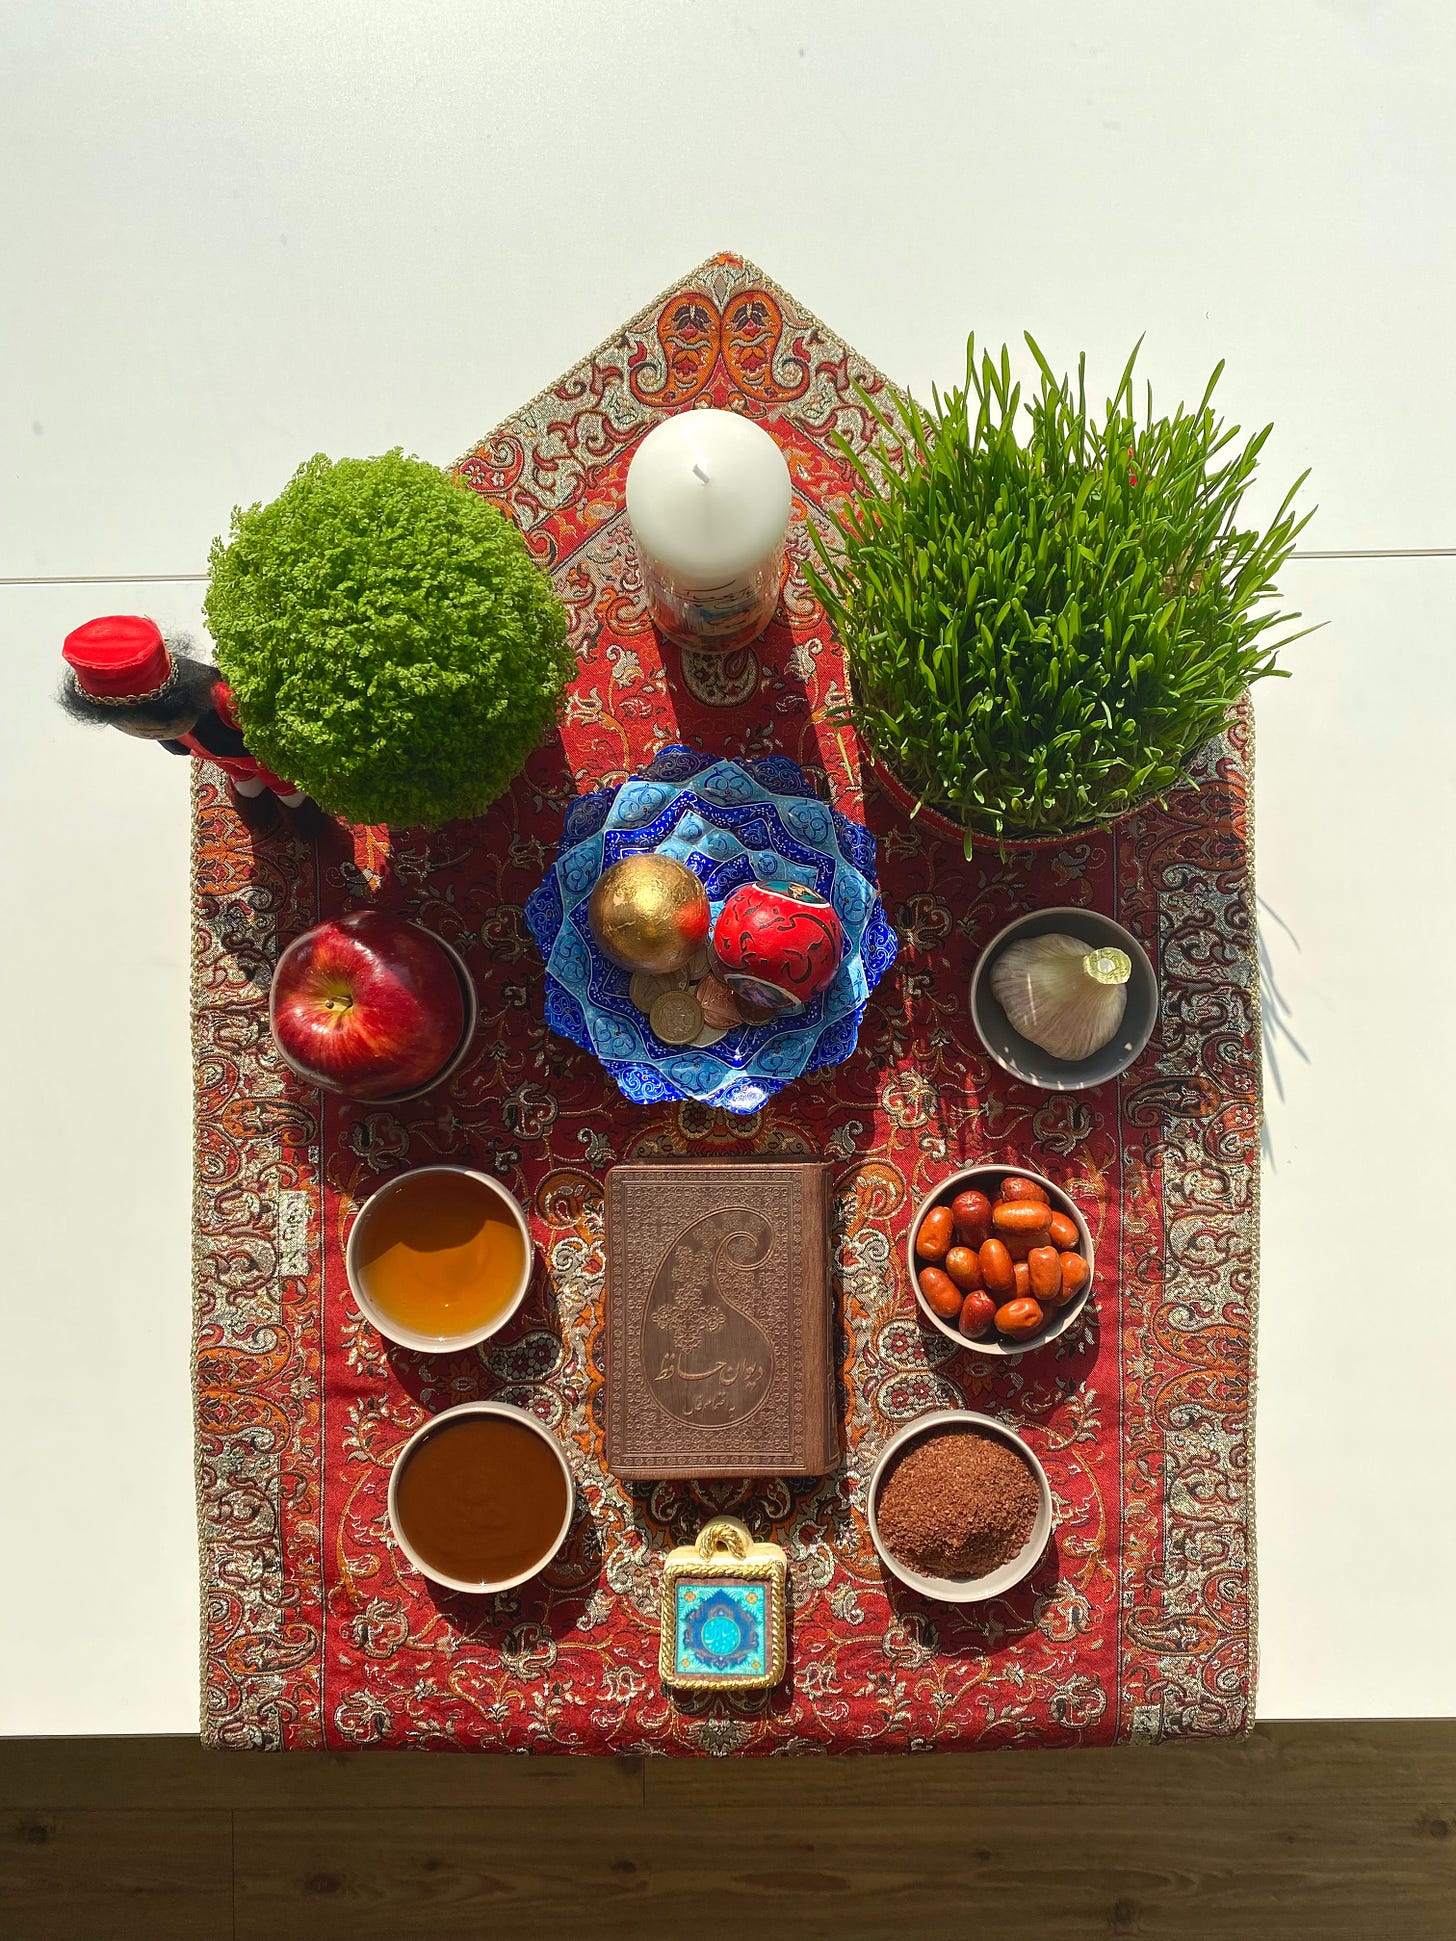 Items for the 7 s table on a beautiful Iranian red patterned cloth, there are herbs, growing wheat, garlic, apple, gold coins, decorated eggs, sumac , candles in decorated ceramic bowls